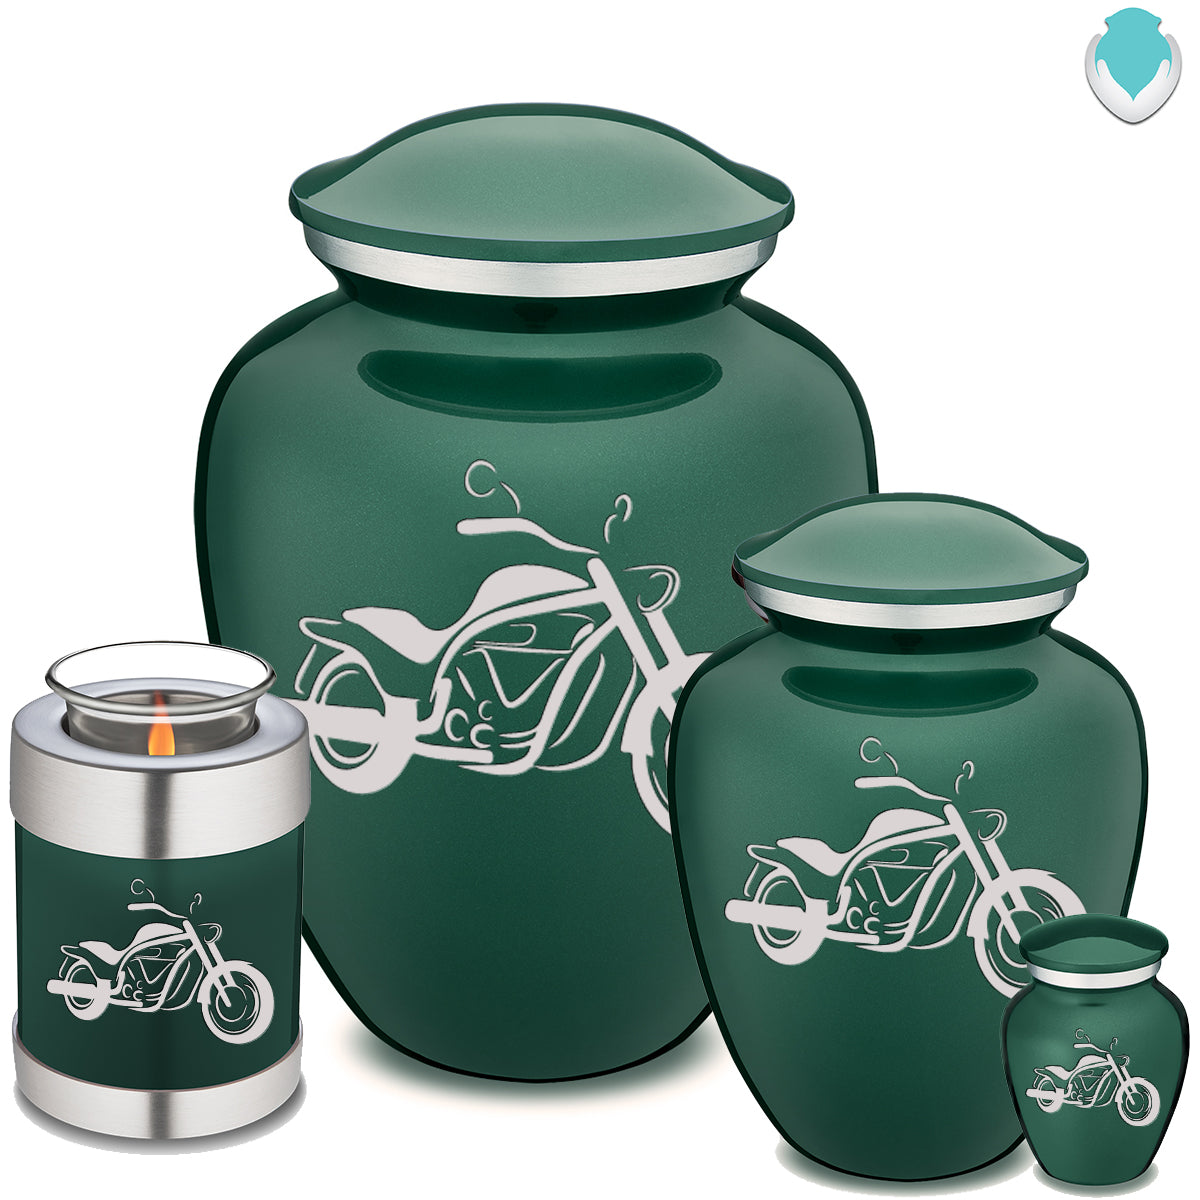 Candle Holder Embrace Green Motorcycle Cremation Urn